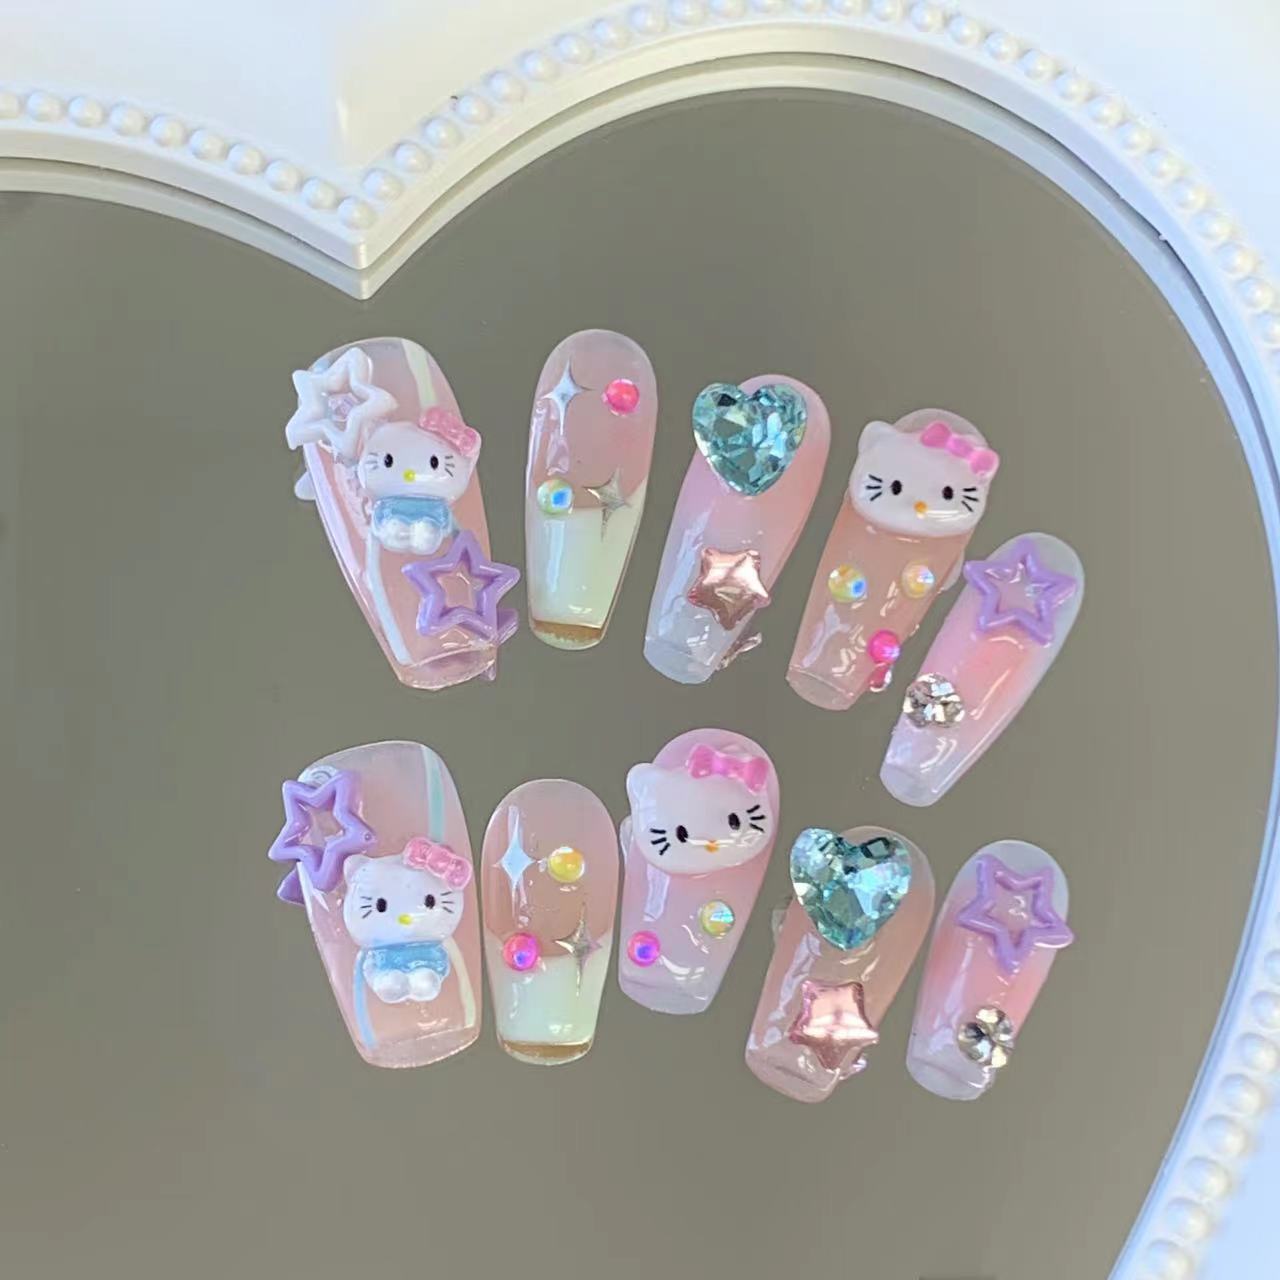 FANTASY KITTY-TEN PIECES OF HANDCRAFTED PRESS ON NAIL